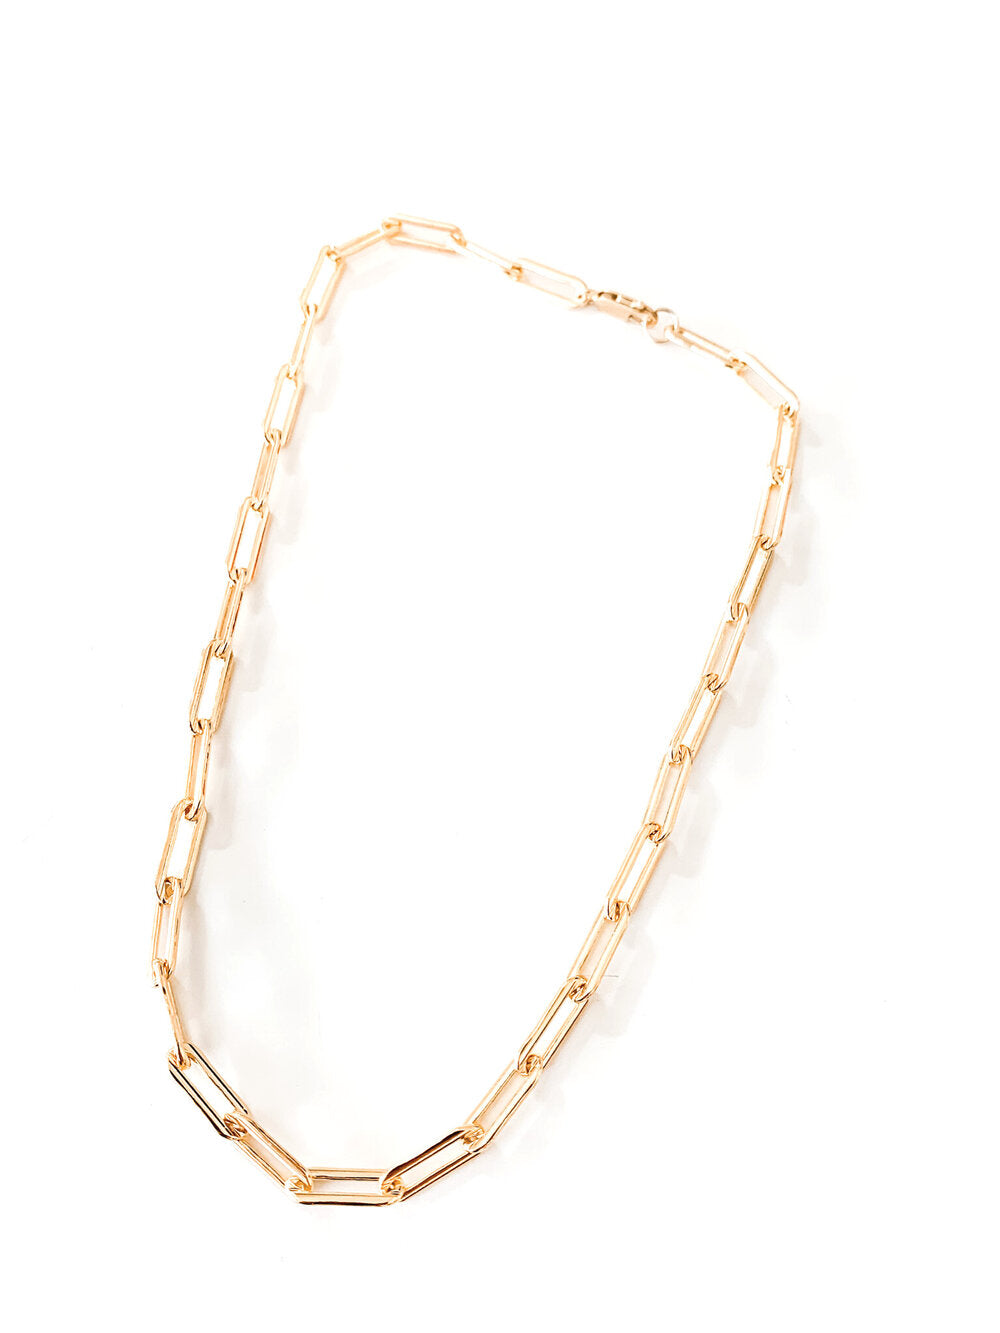 SOCIETY NAUTIQUE | Riley Thick Necklace